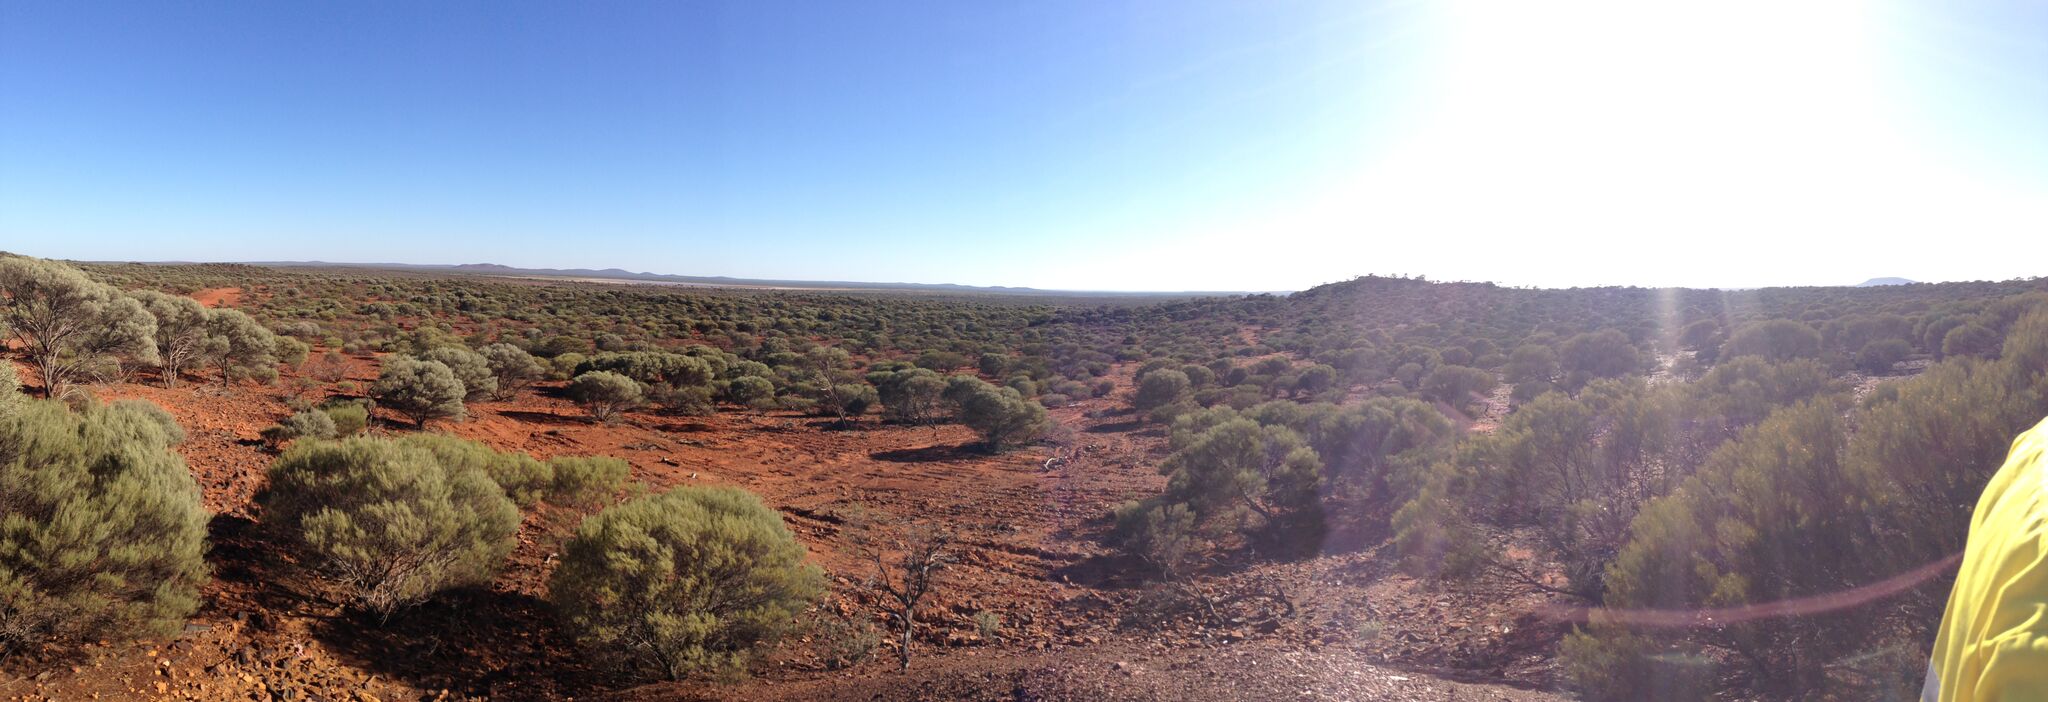 WA outback with red dirt and low shrubs